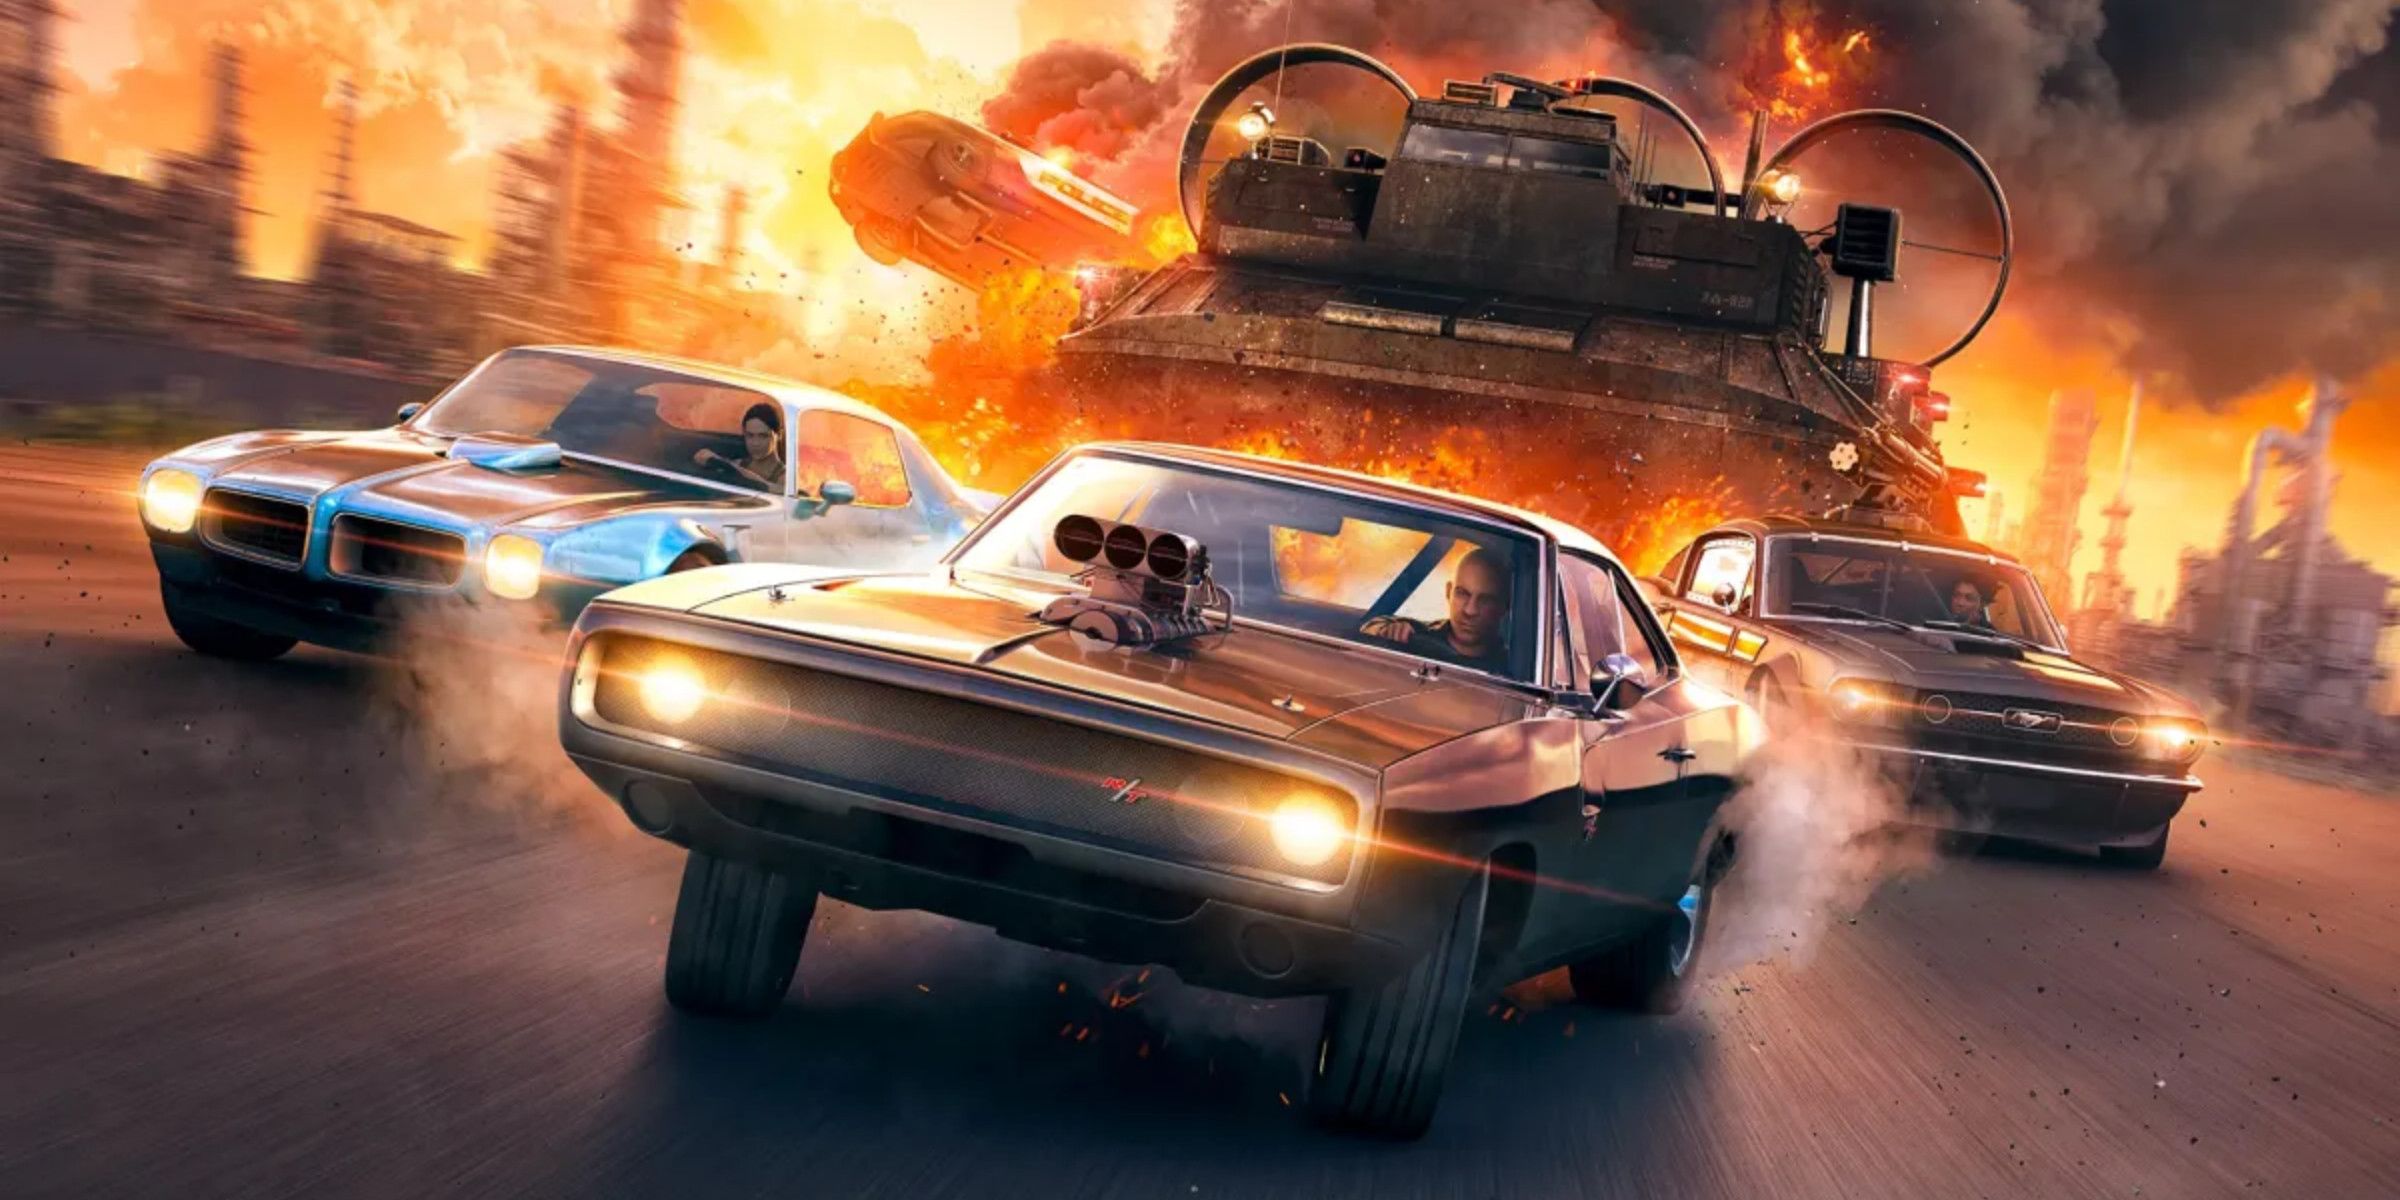 Dom, Roman and Letty speeding away with explosions in the distance